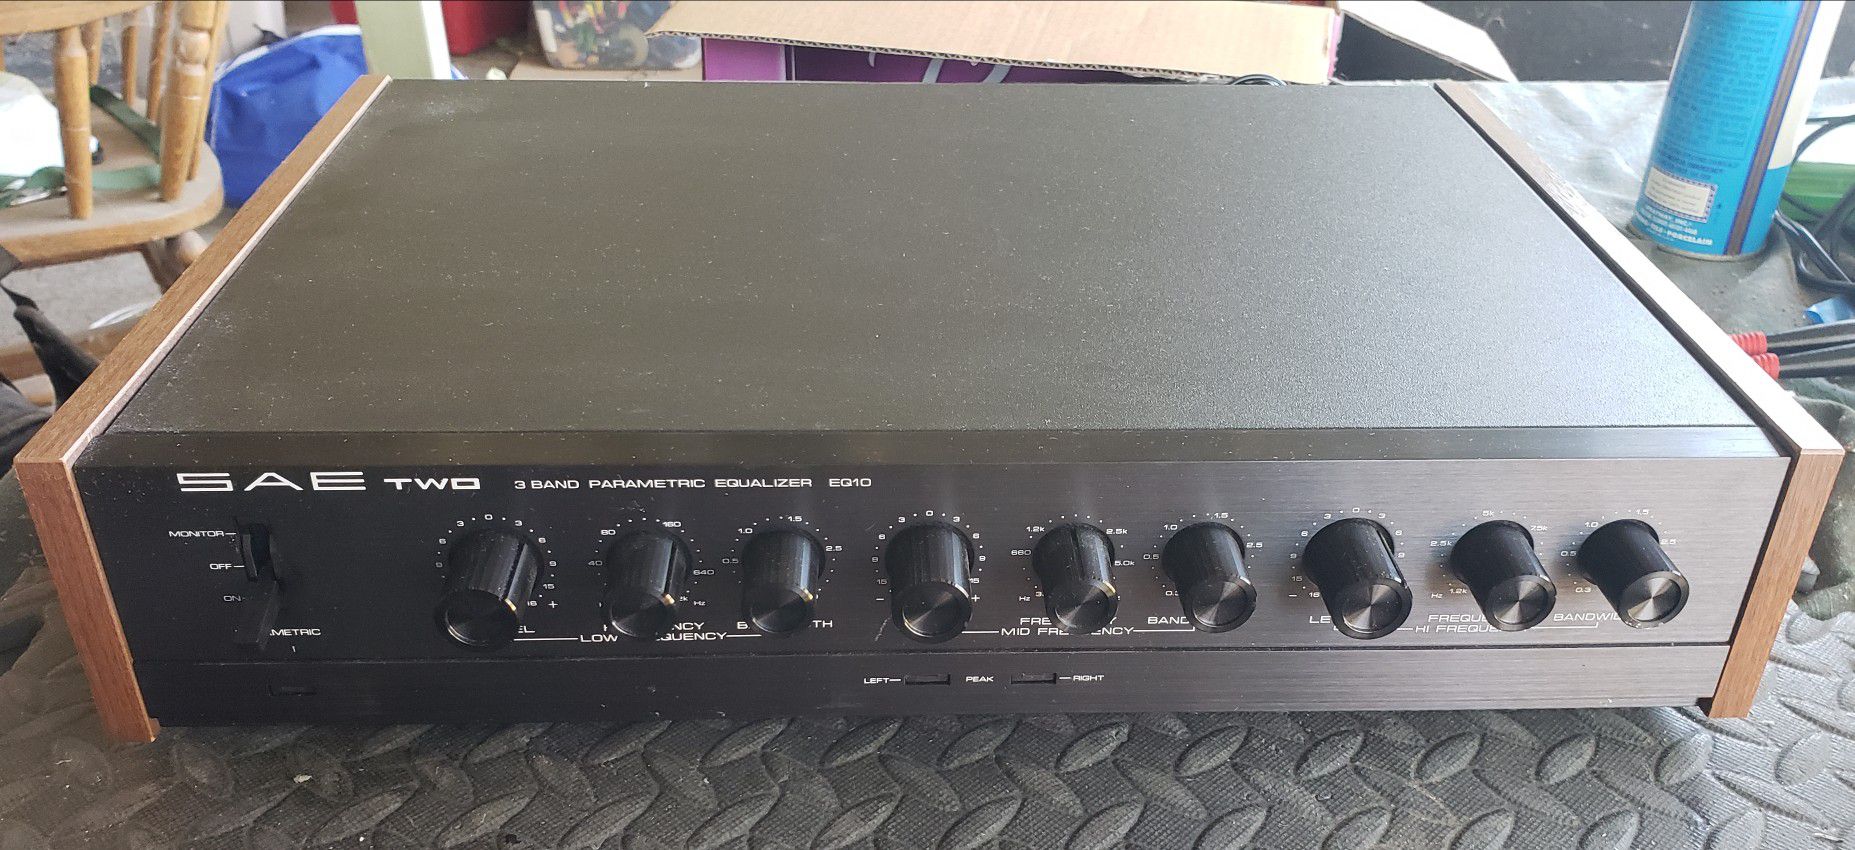 kenwood stereo control amplifier basic c1